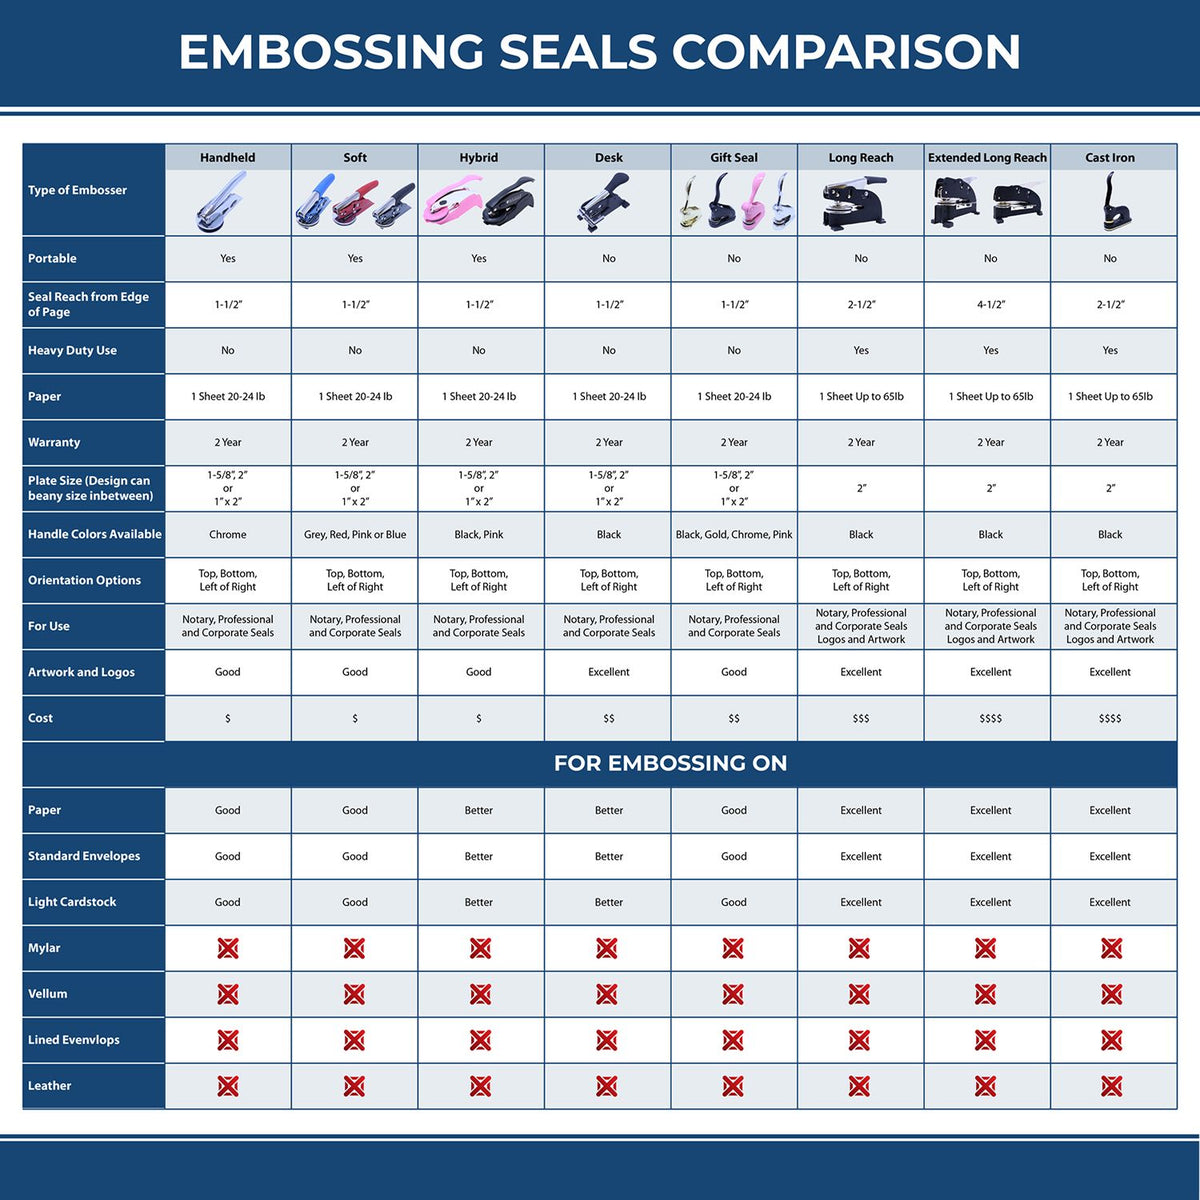 A comparison chart for the different types of mount models available for the Long Reach Indiana Geology Seal